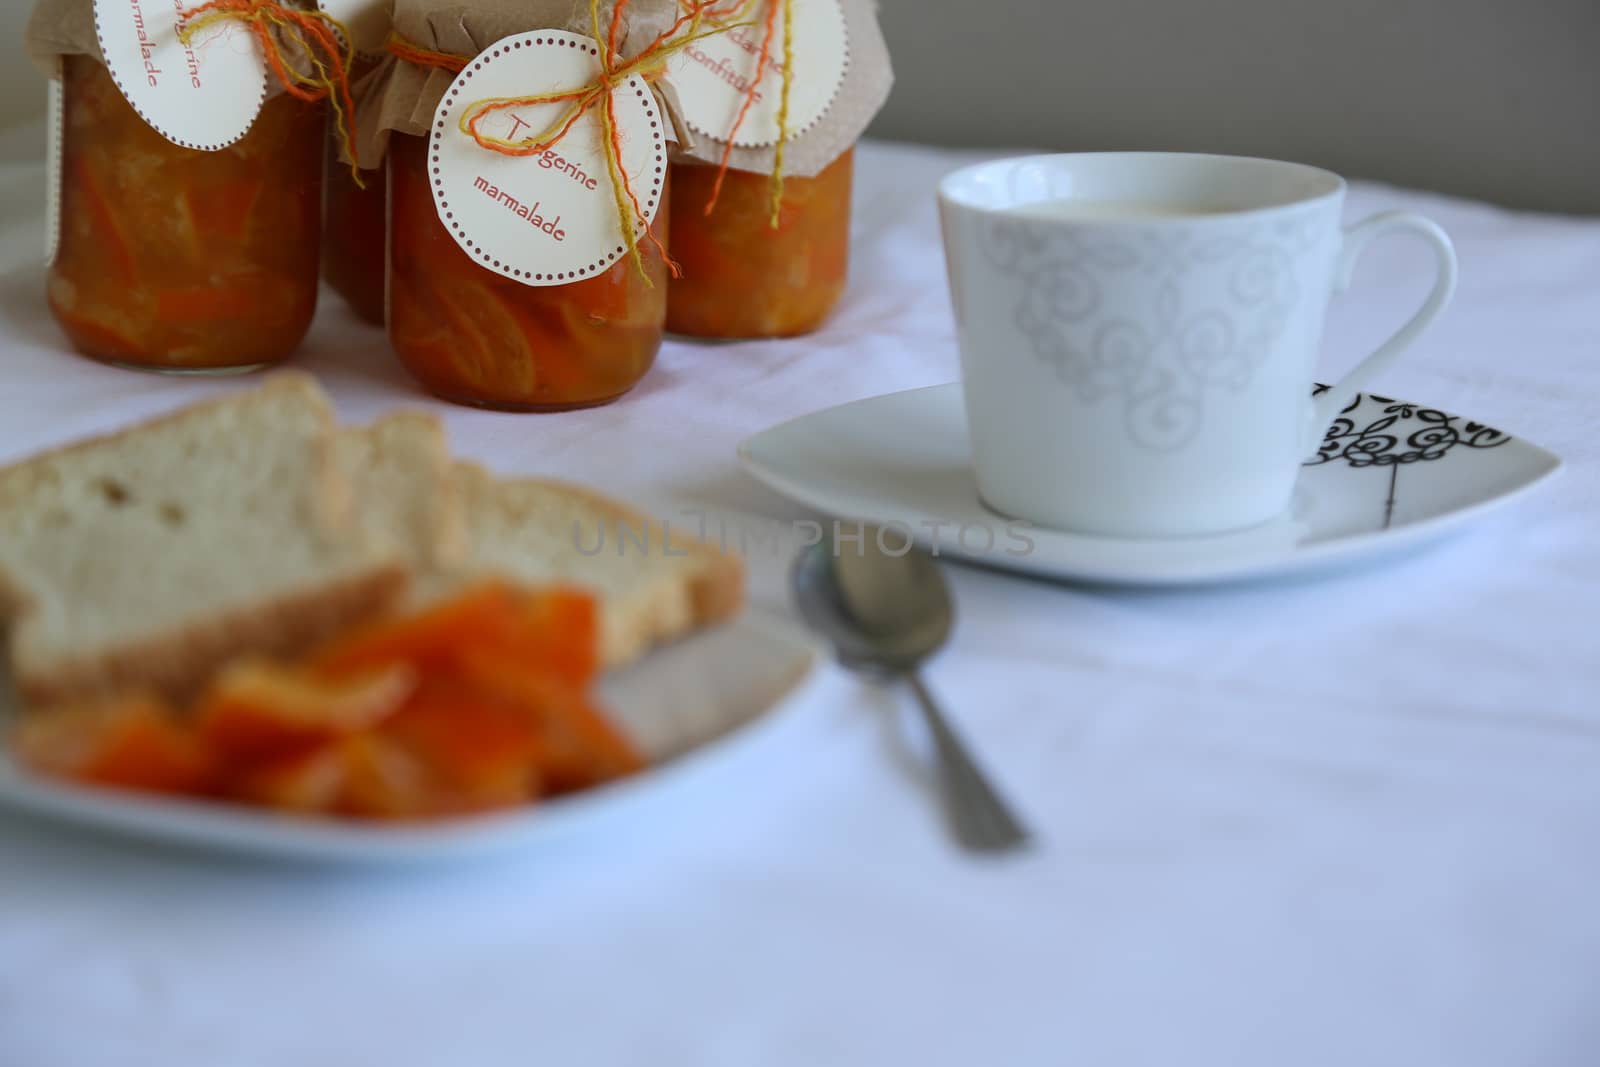 Homemade tangerine marmalade and a cup of milk